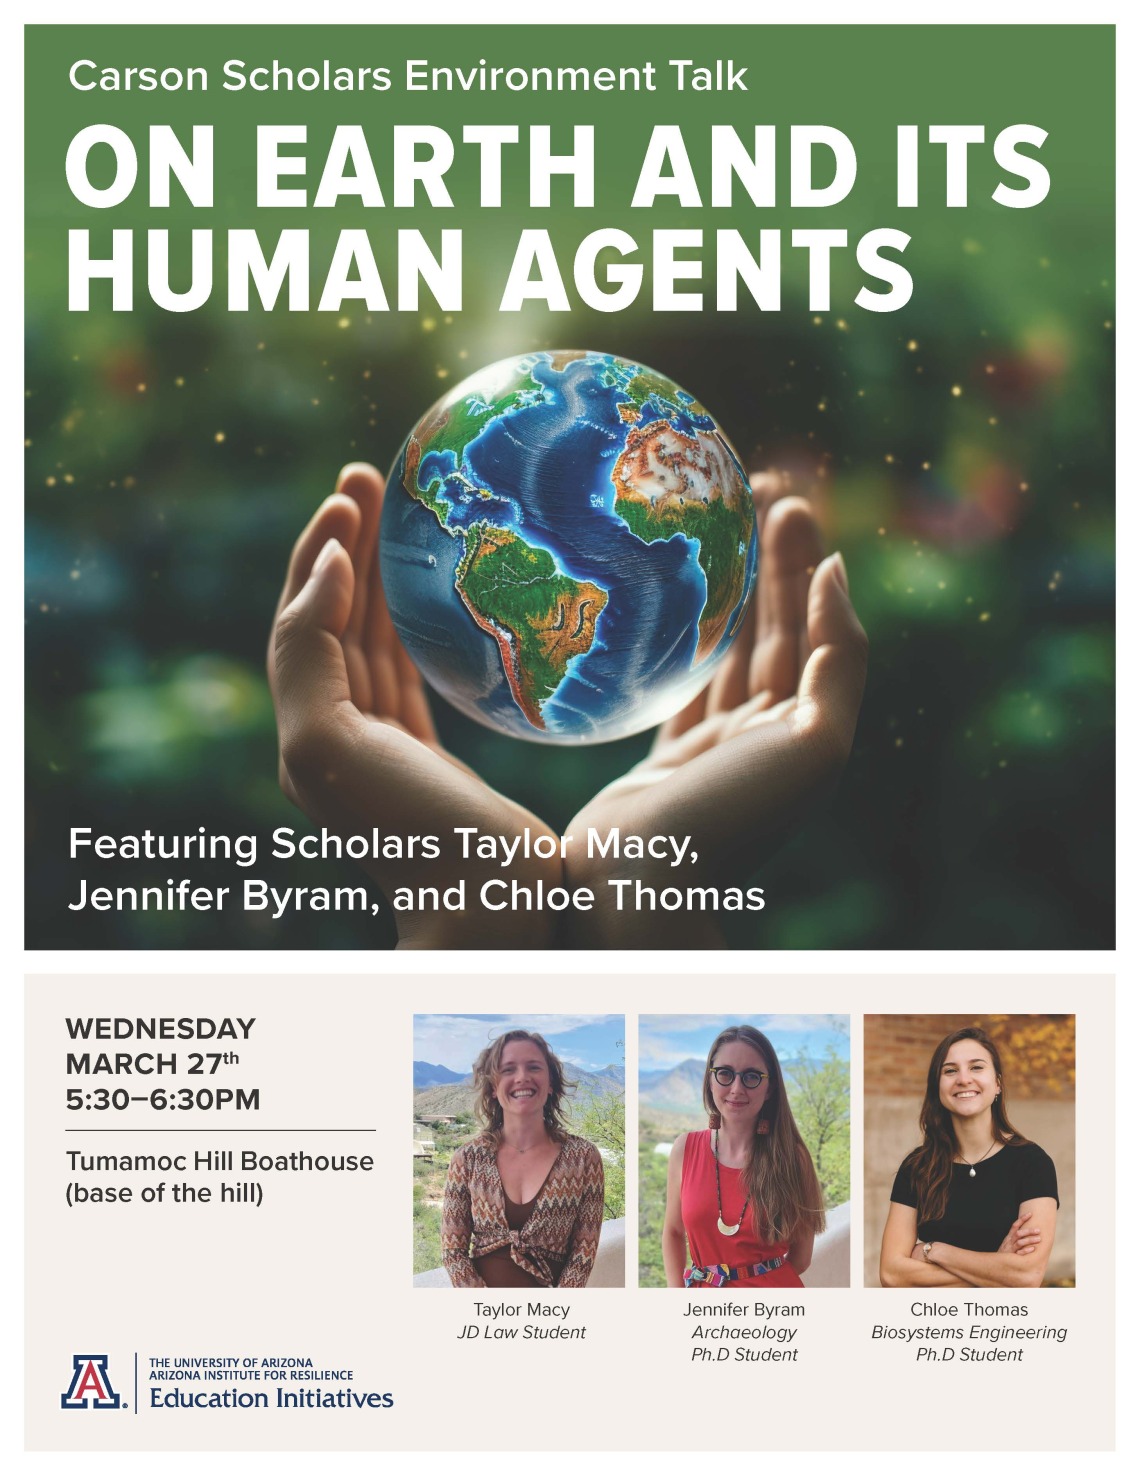 Carson Scholar Talks Flyer with image of the earth and hands holding it